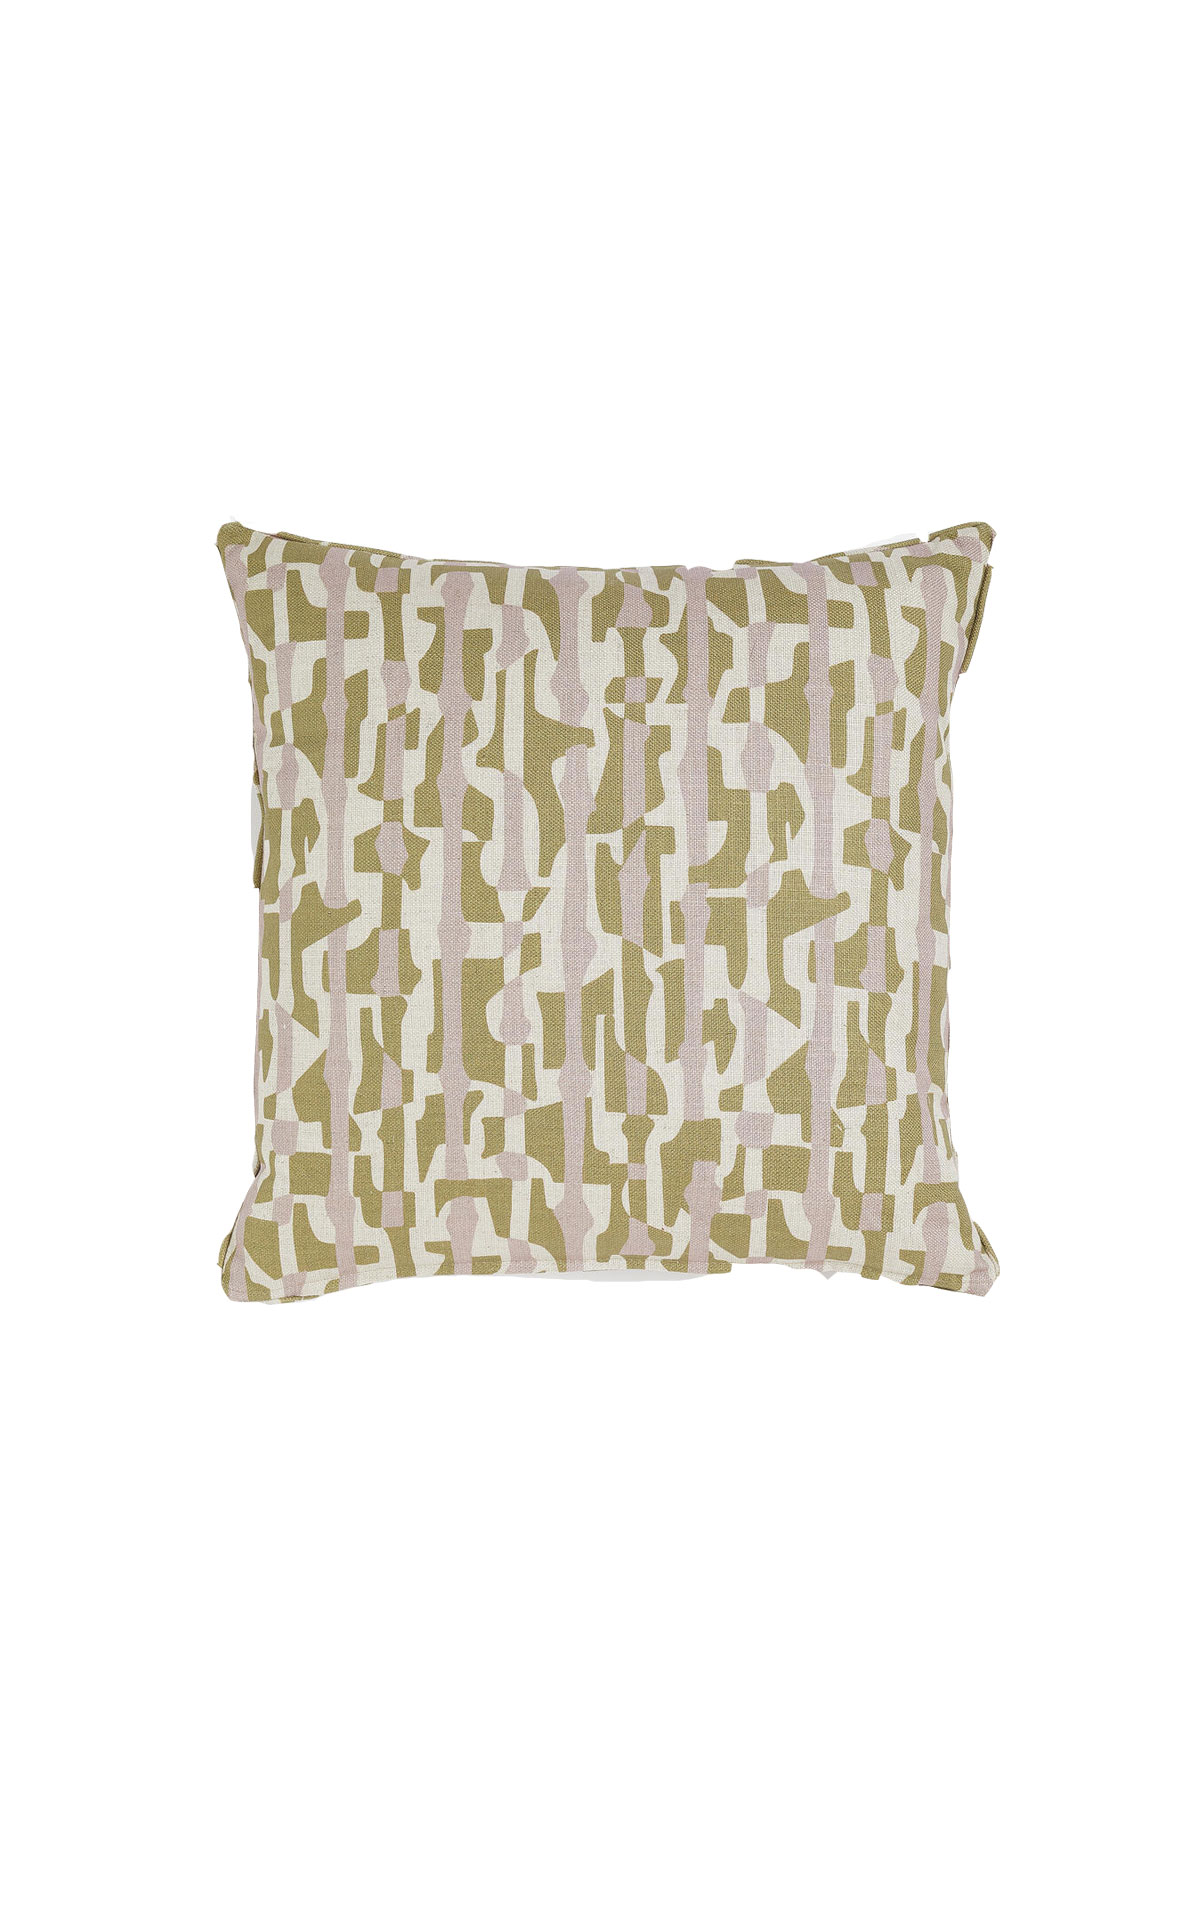 Soho Home Mozley square cushion lilac from Bicester Village